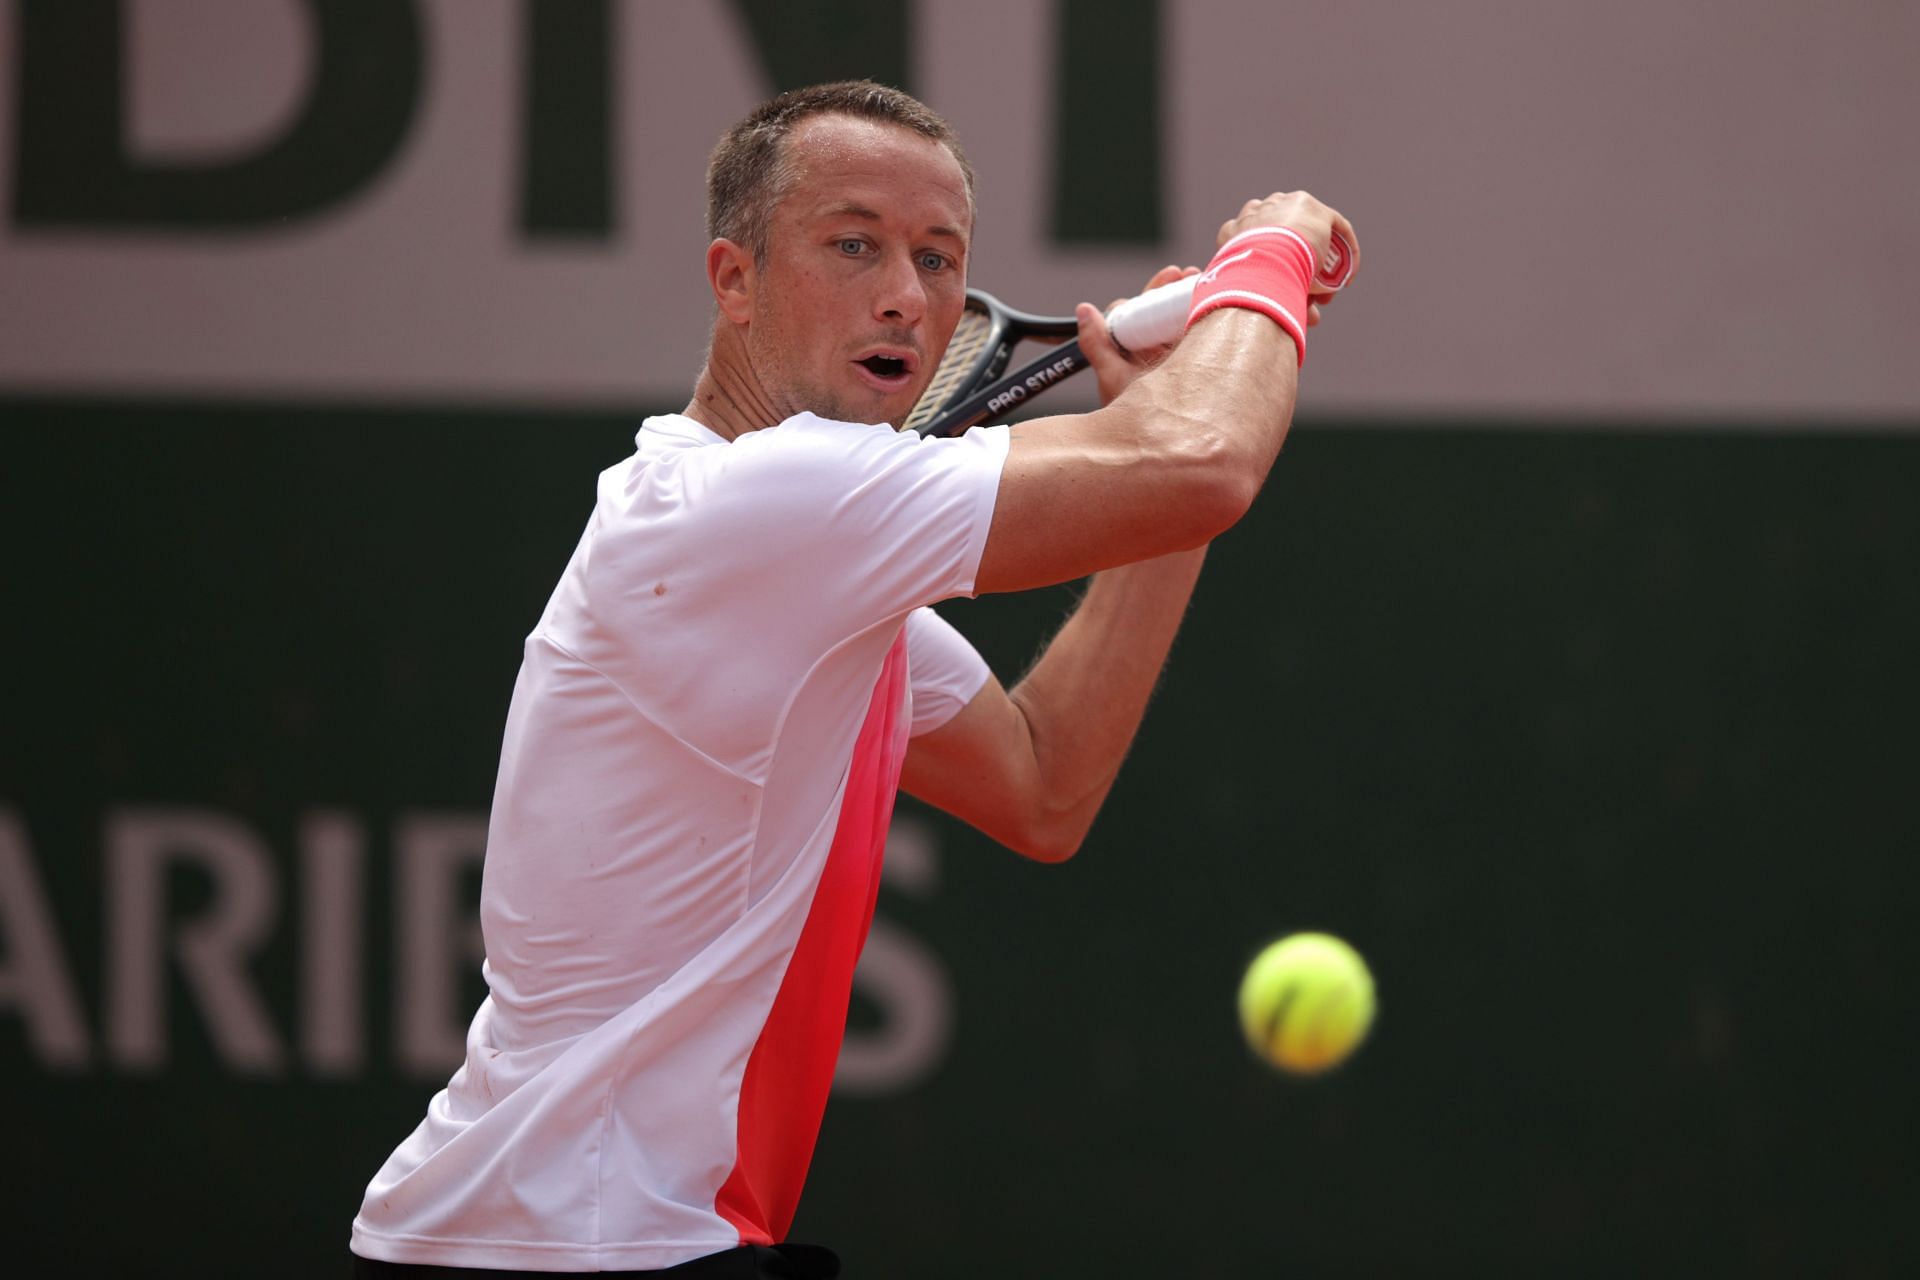 Philipp Kohlschreiber at the 2021 French Open